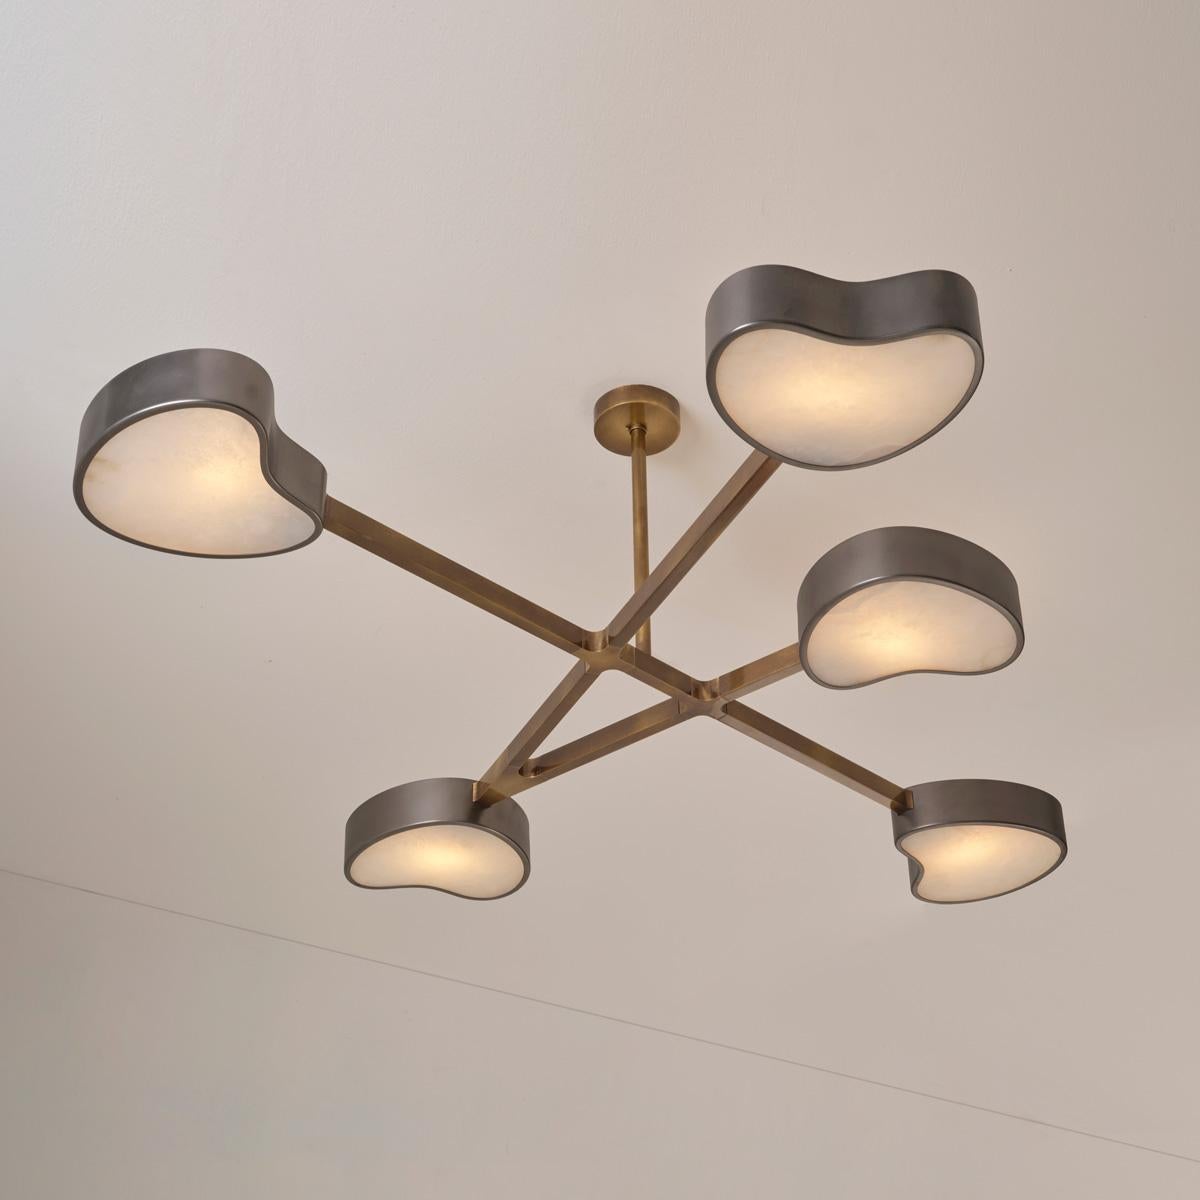 The Cuore collection was conceived with the goal of creating fixtures that are unexpected yet clean and harmoniously balanced. This is highlighted by the organically styled shades sprouting out of linear frames. Carefully thought-out details such as